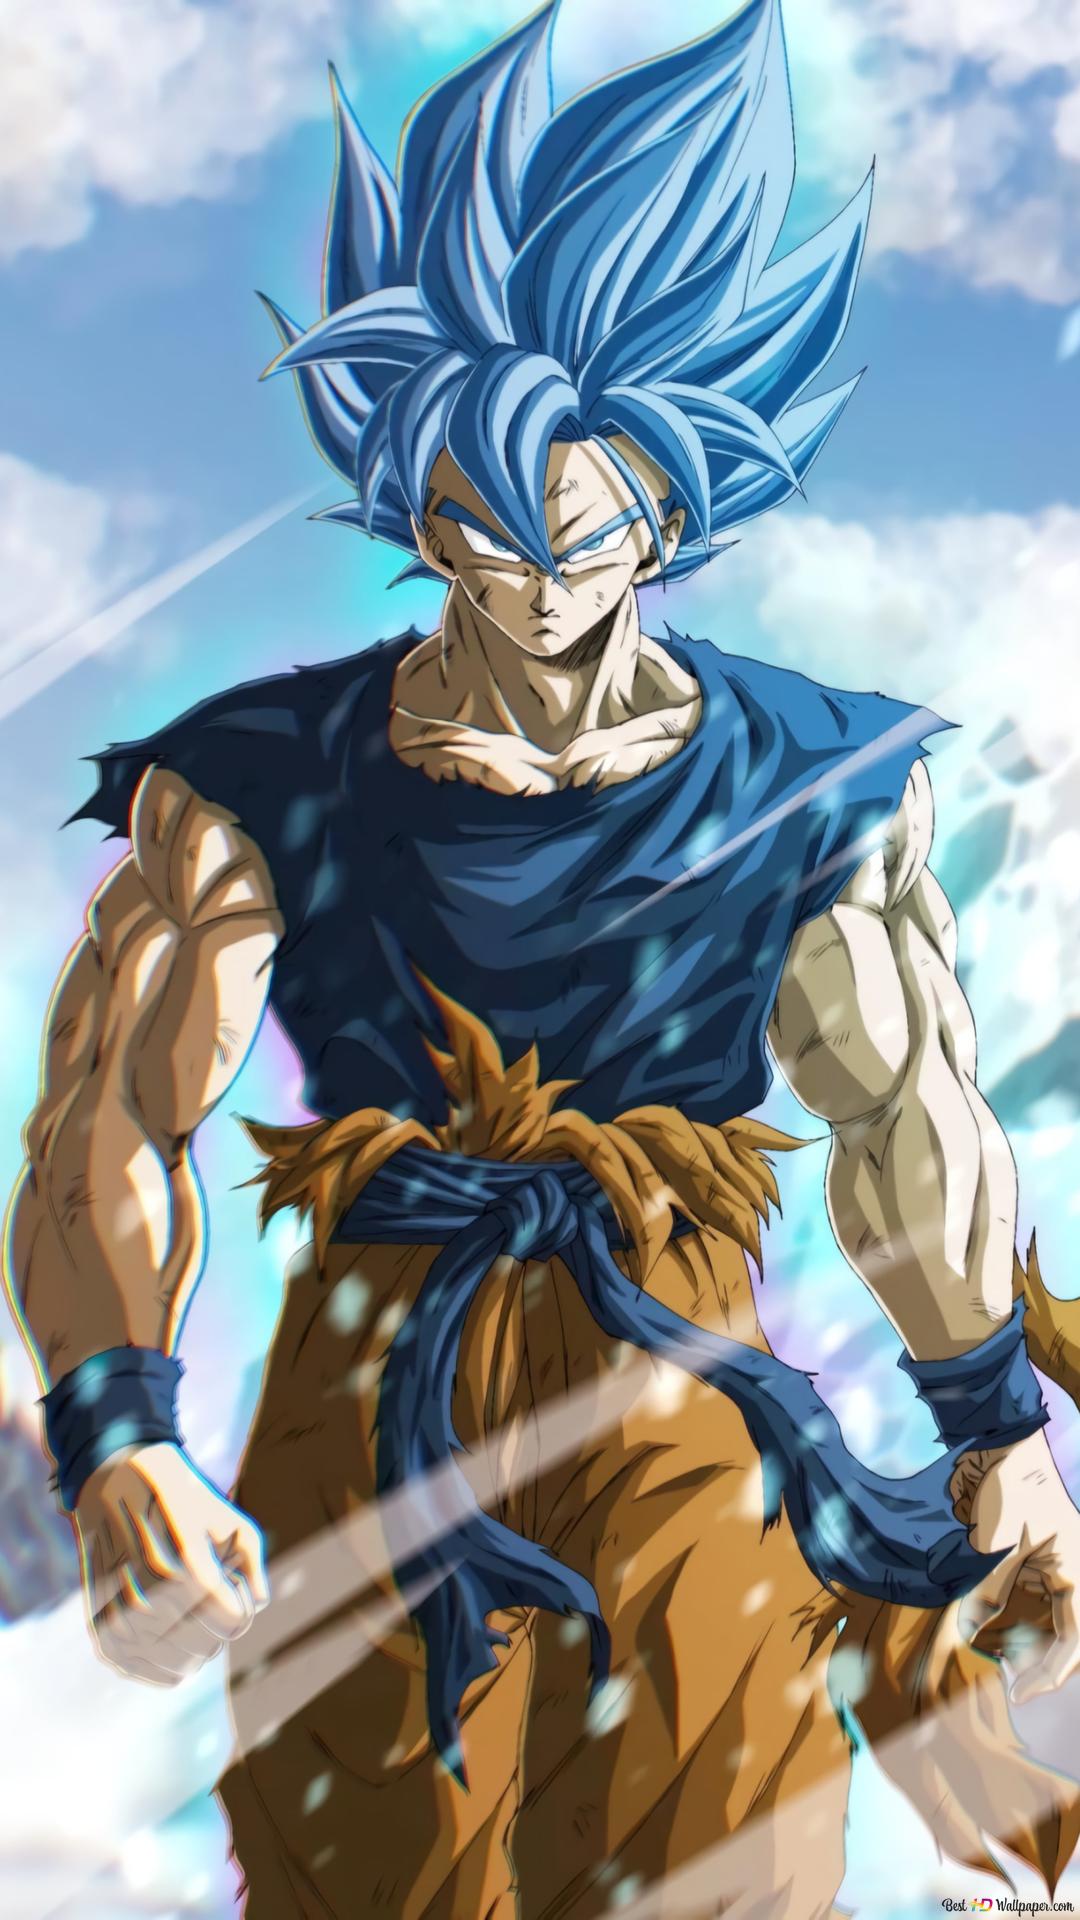 Anime character Son Goku with blue hair, muscular body, brown pants and angry blue eyes 2K wallpaper download